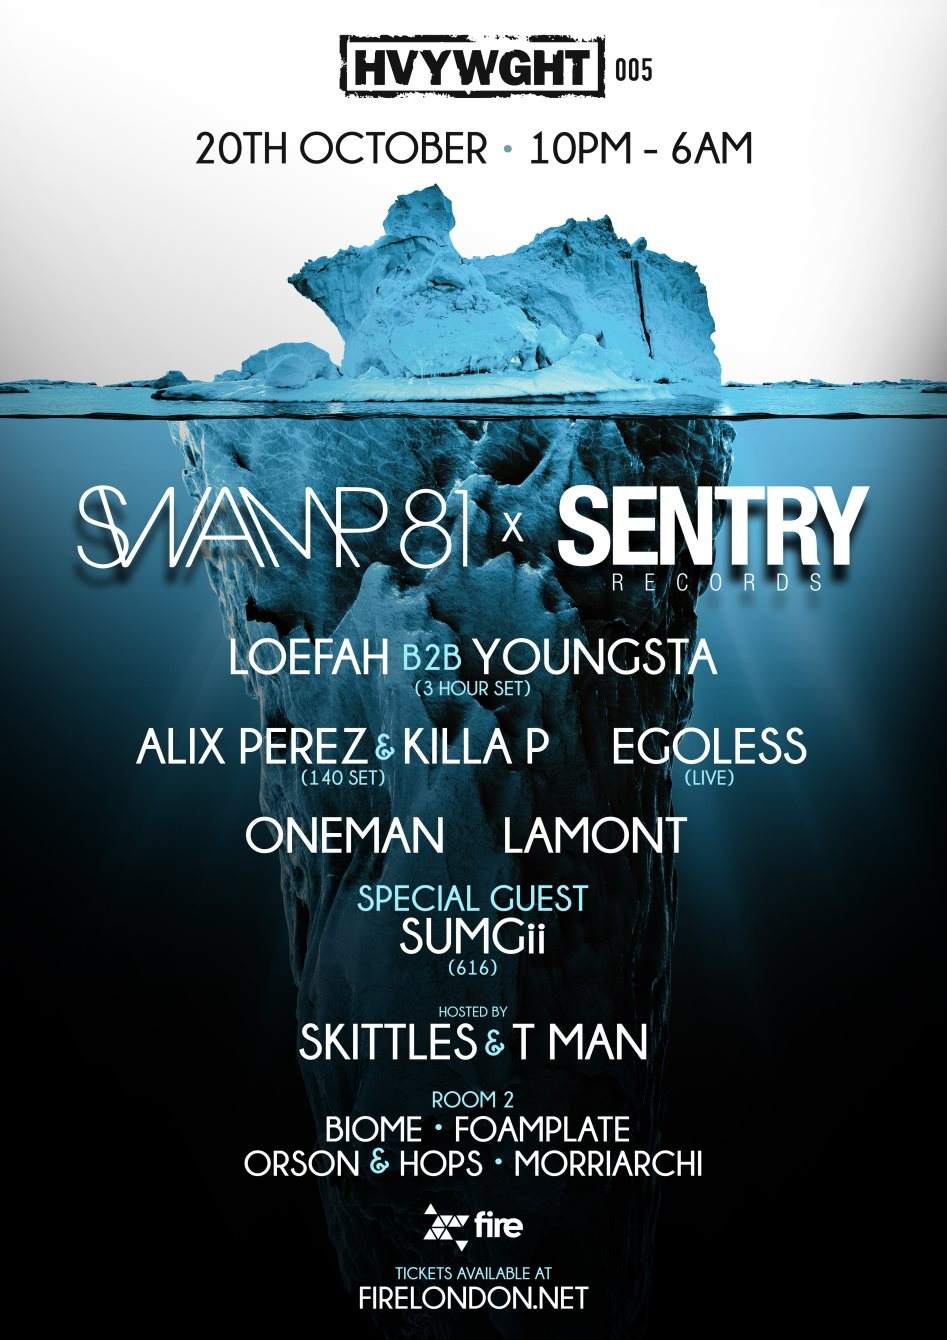 [Limited Tickets on the Door] Hvywght005 presents: Swamp 81 x Sentry Records - Página trasera